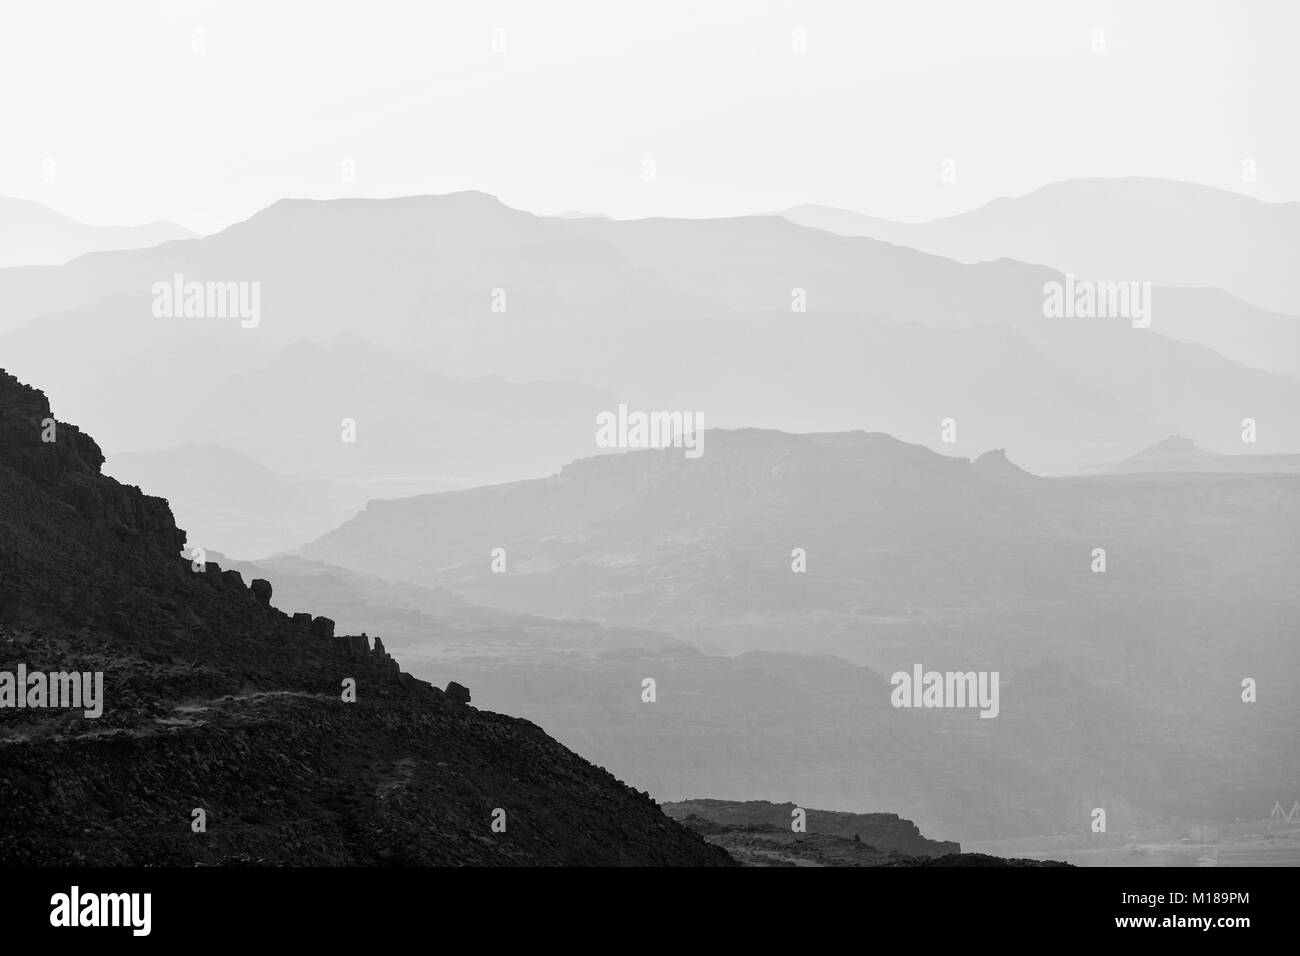 View of the Dead Sea and the mountains of Jordan (monochrome) Stock Photo